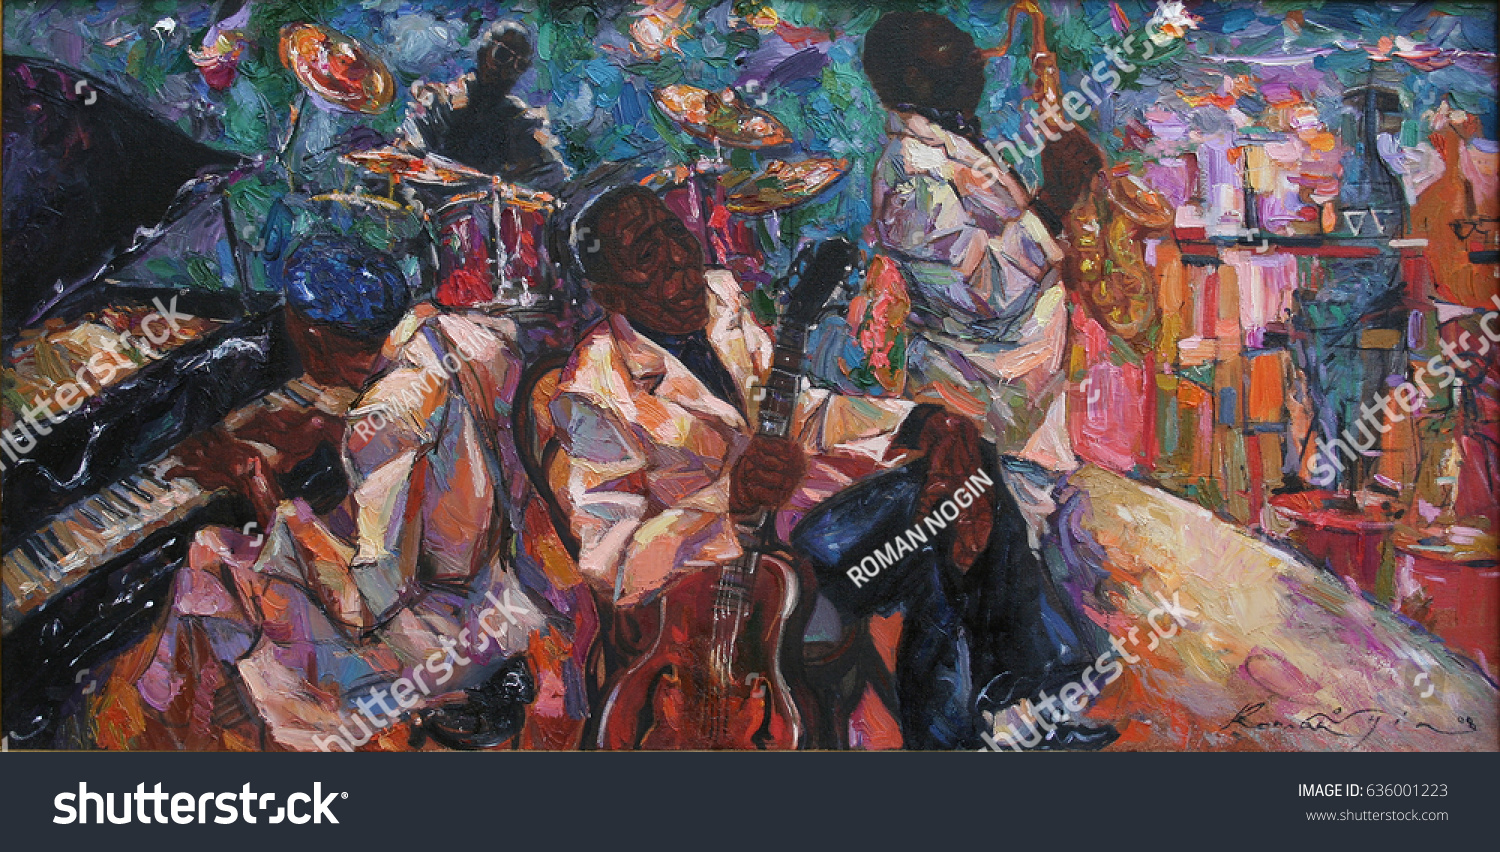  jazz club, oil painting, artist Roman Nogin, series "Sounds of Jazz." ,looking for partnerships with artdillers sale original - contact facebook
 #636001223